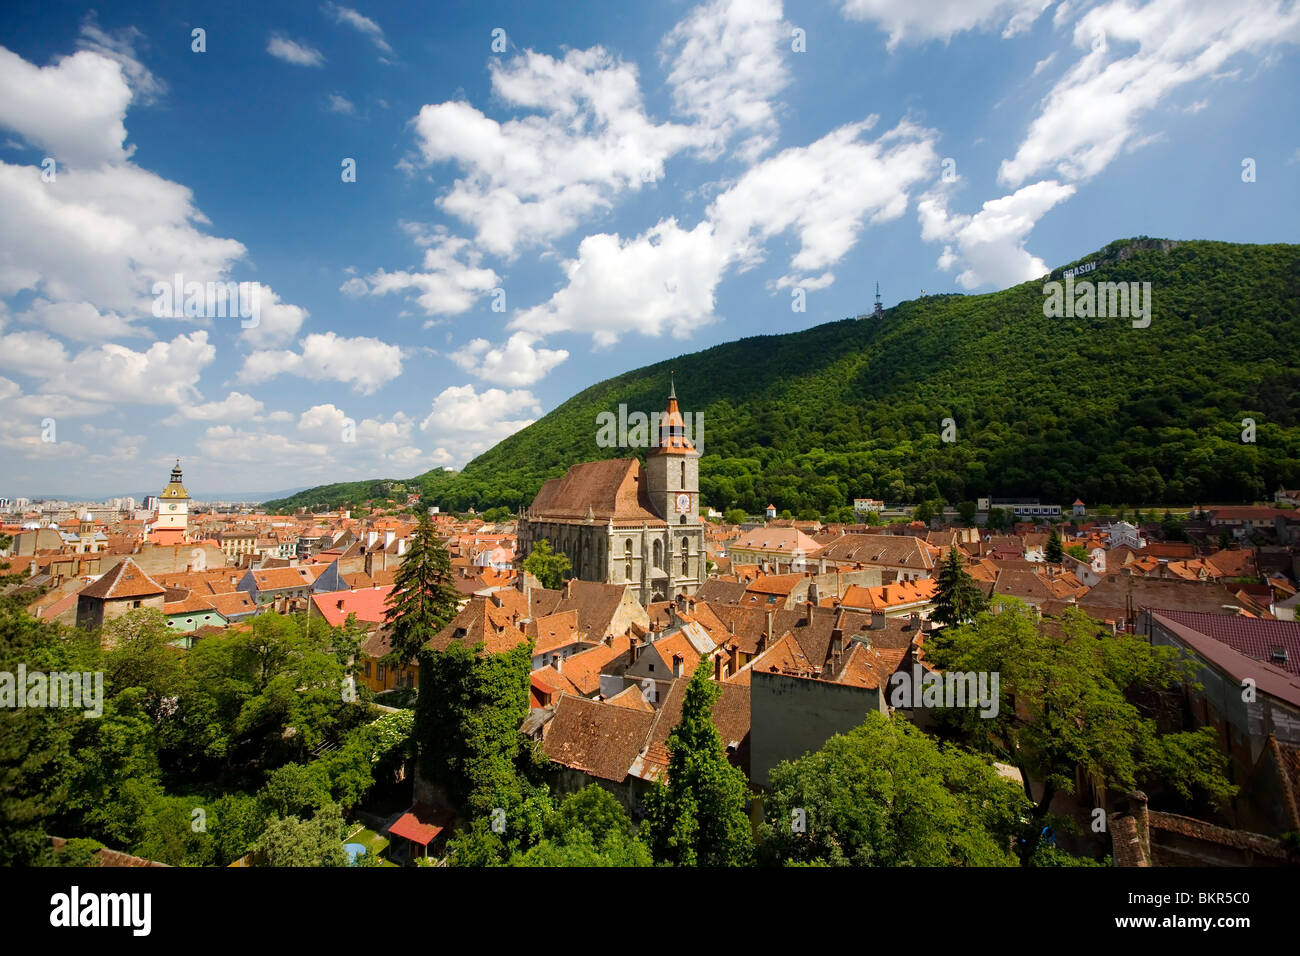 Romania, Transylvania, Brasov. Rooftops of the old centre of Brasov, surrounded by woodlands. Stock Photo